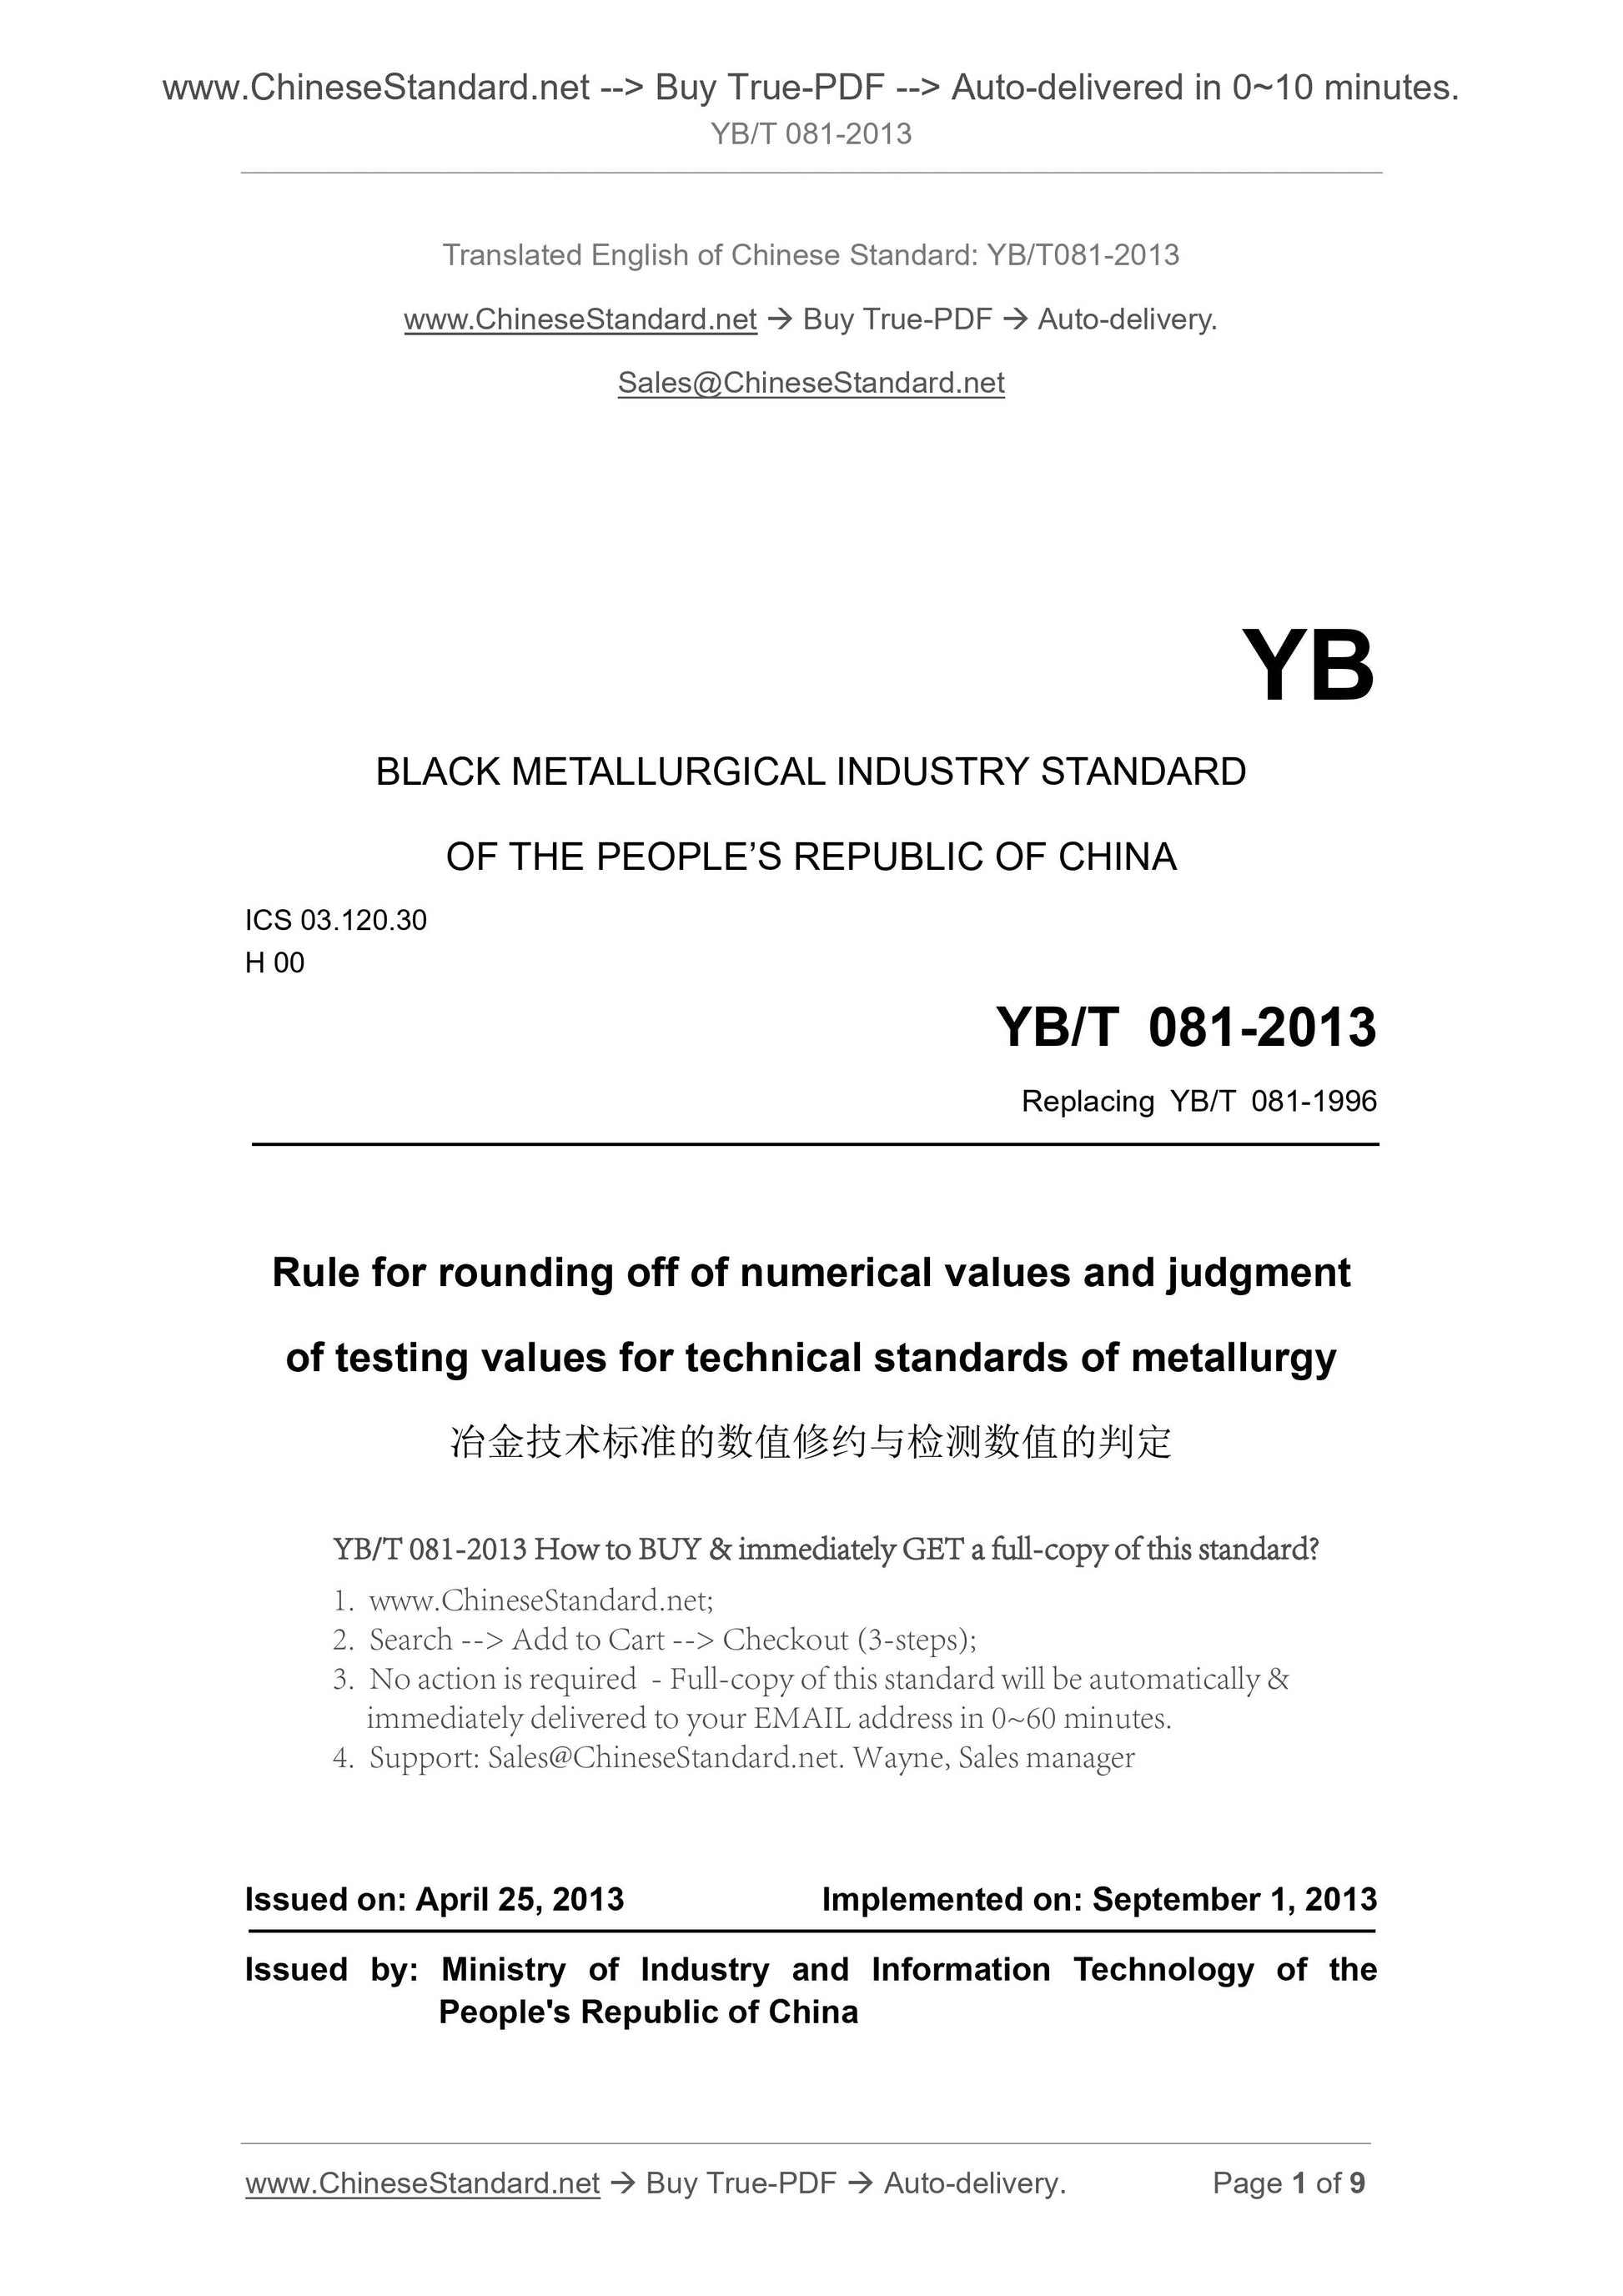 YB/T 081-2013 Page 1